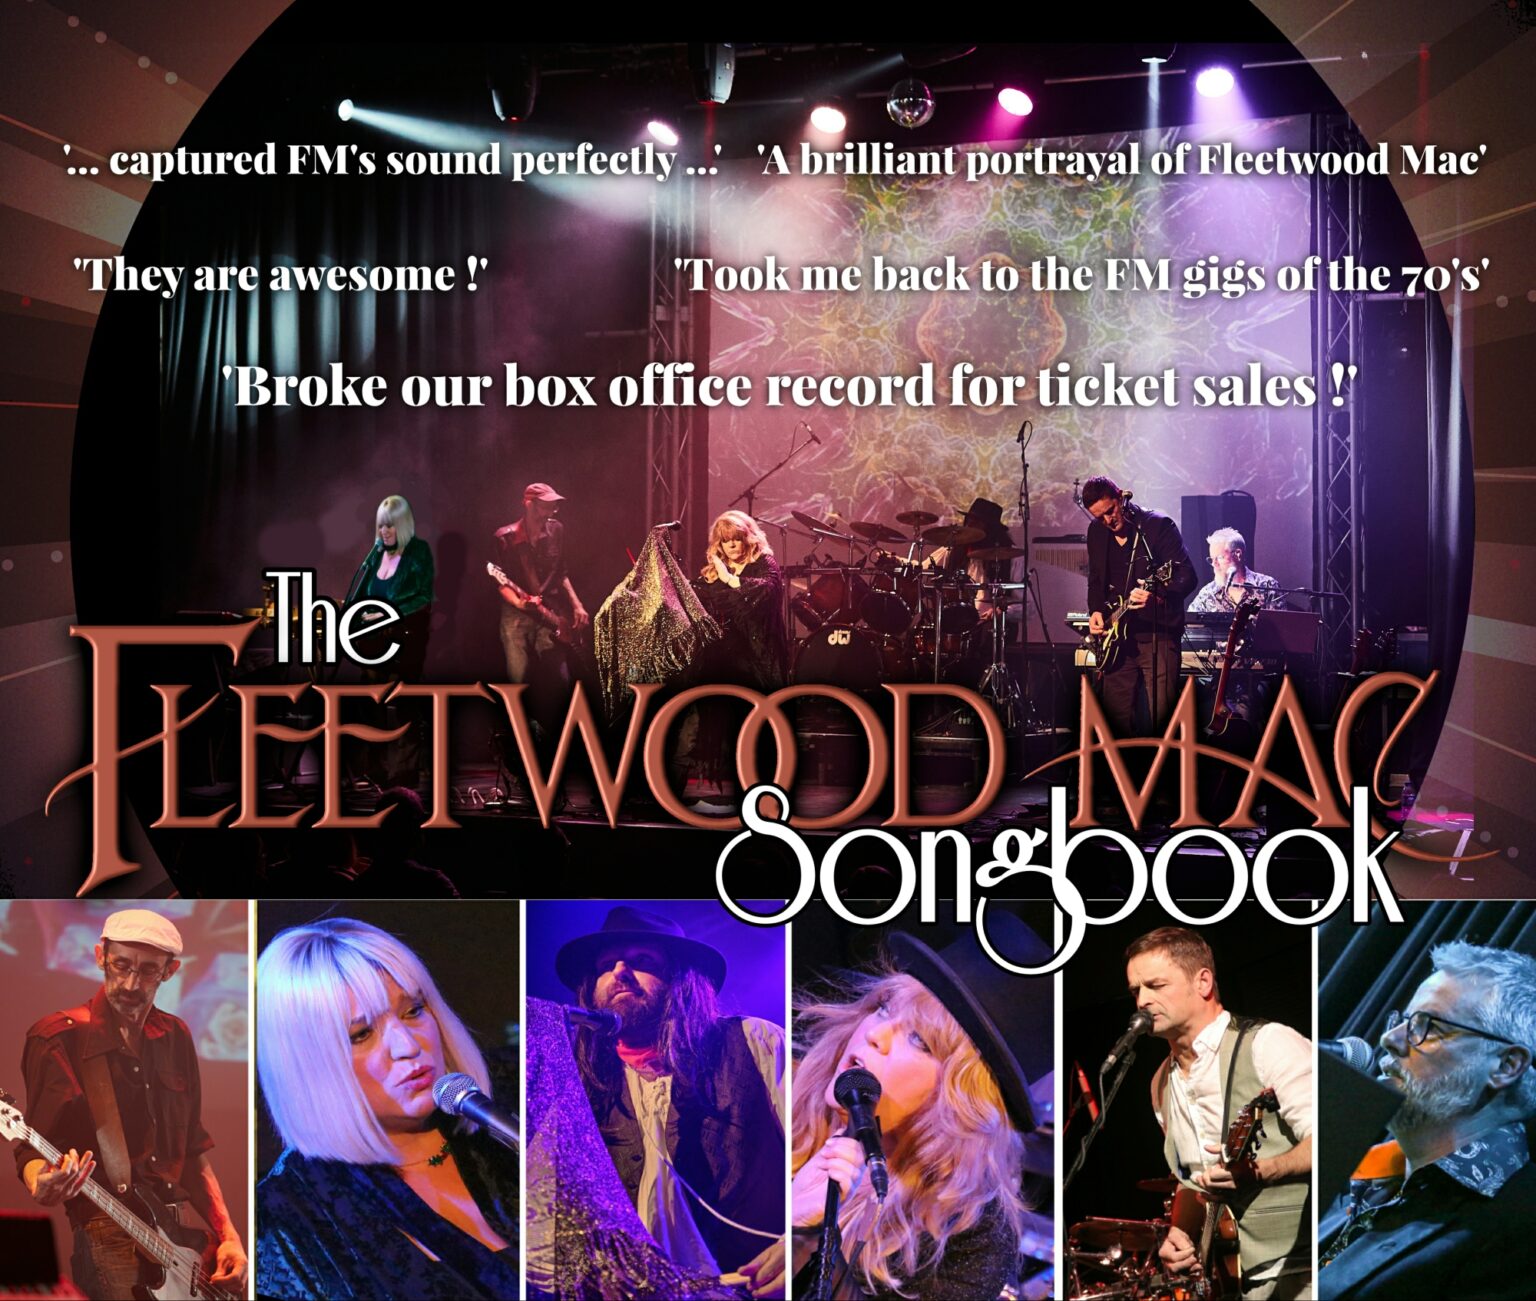 the fleetwood mac songbook tour